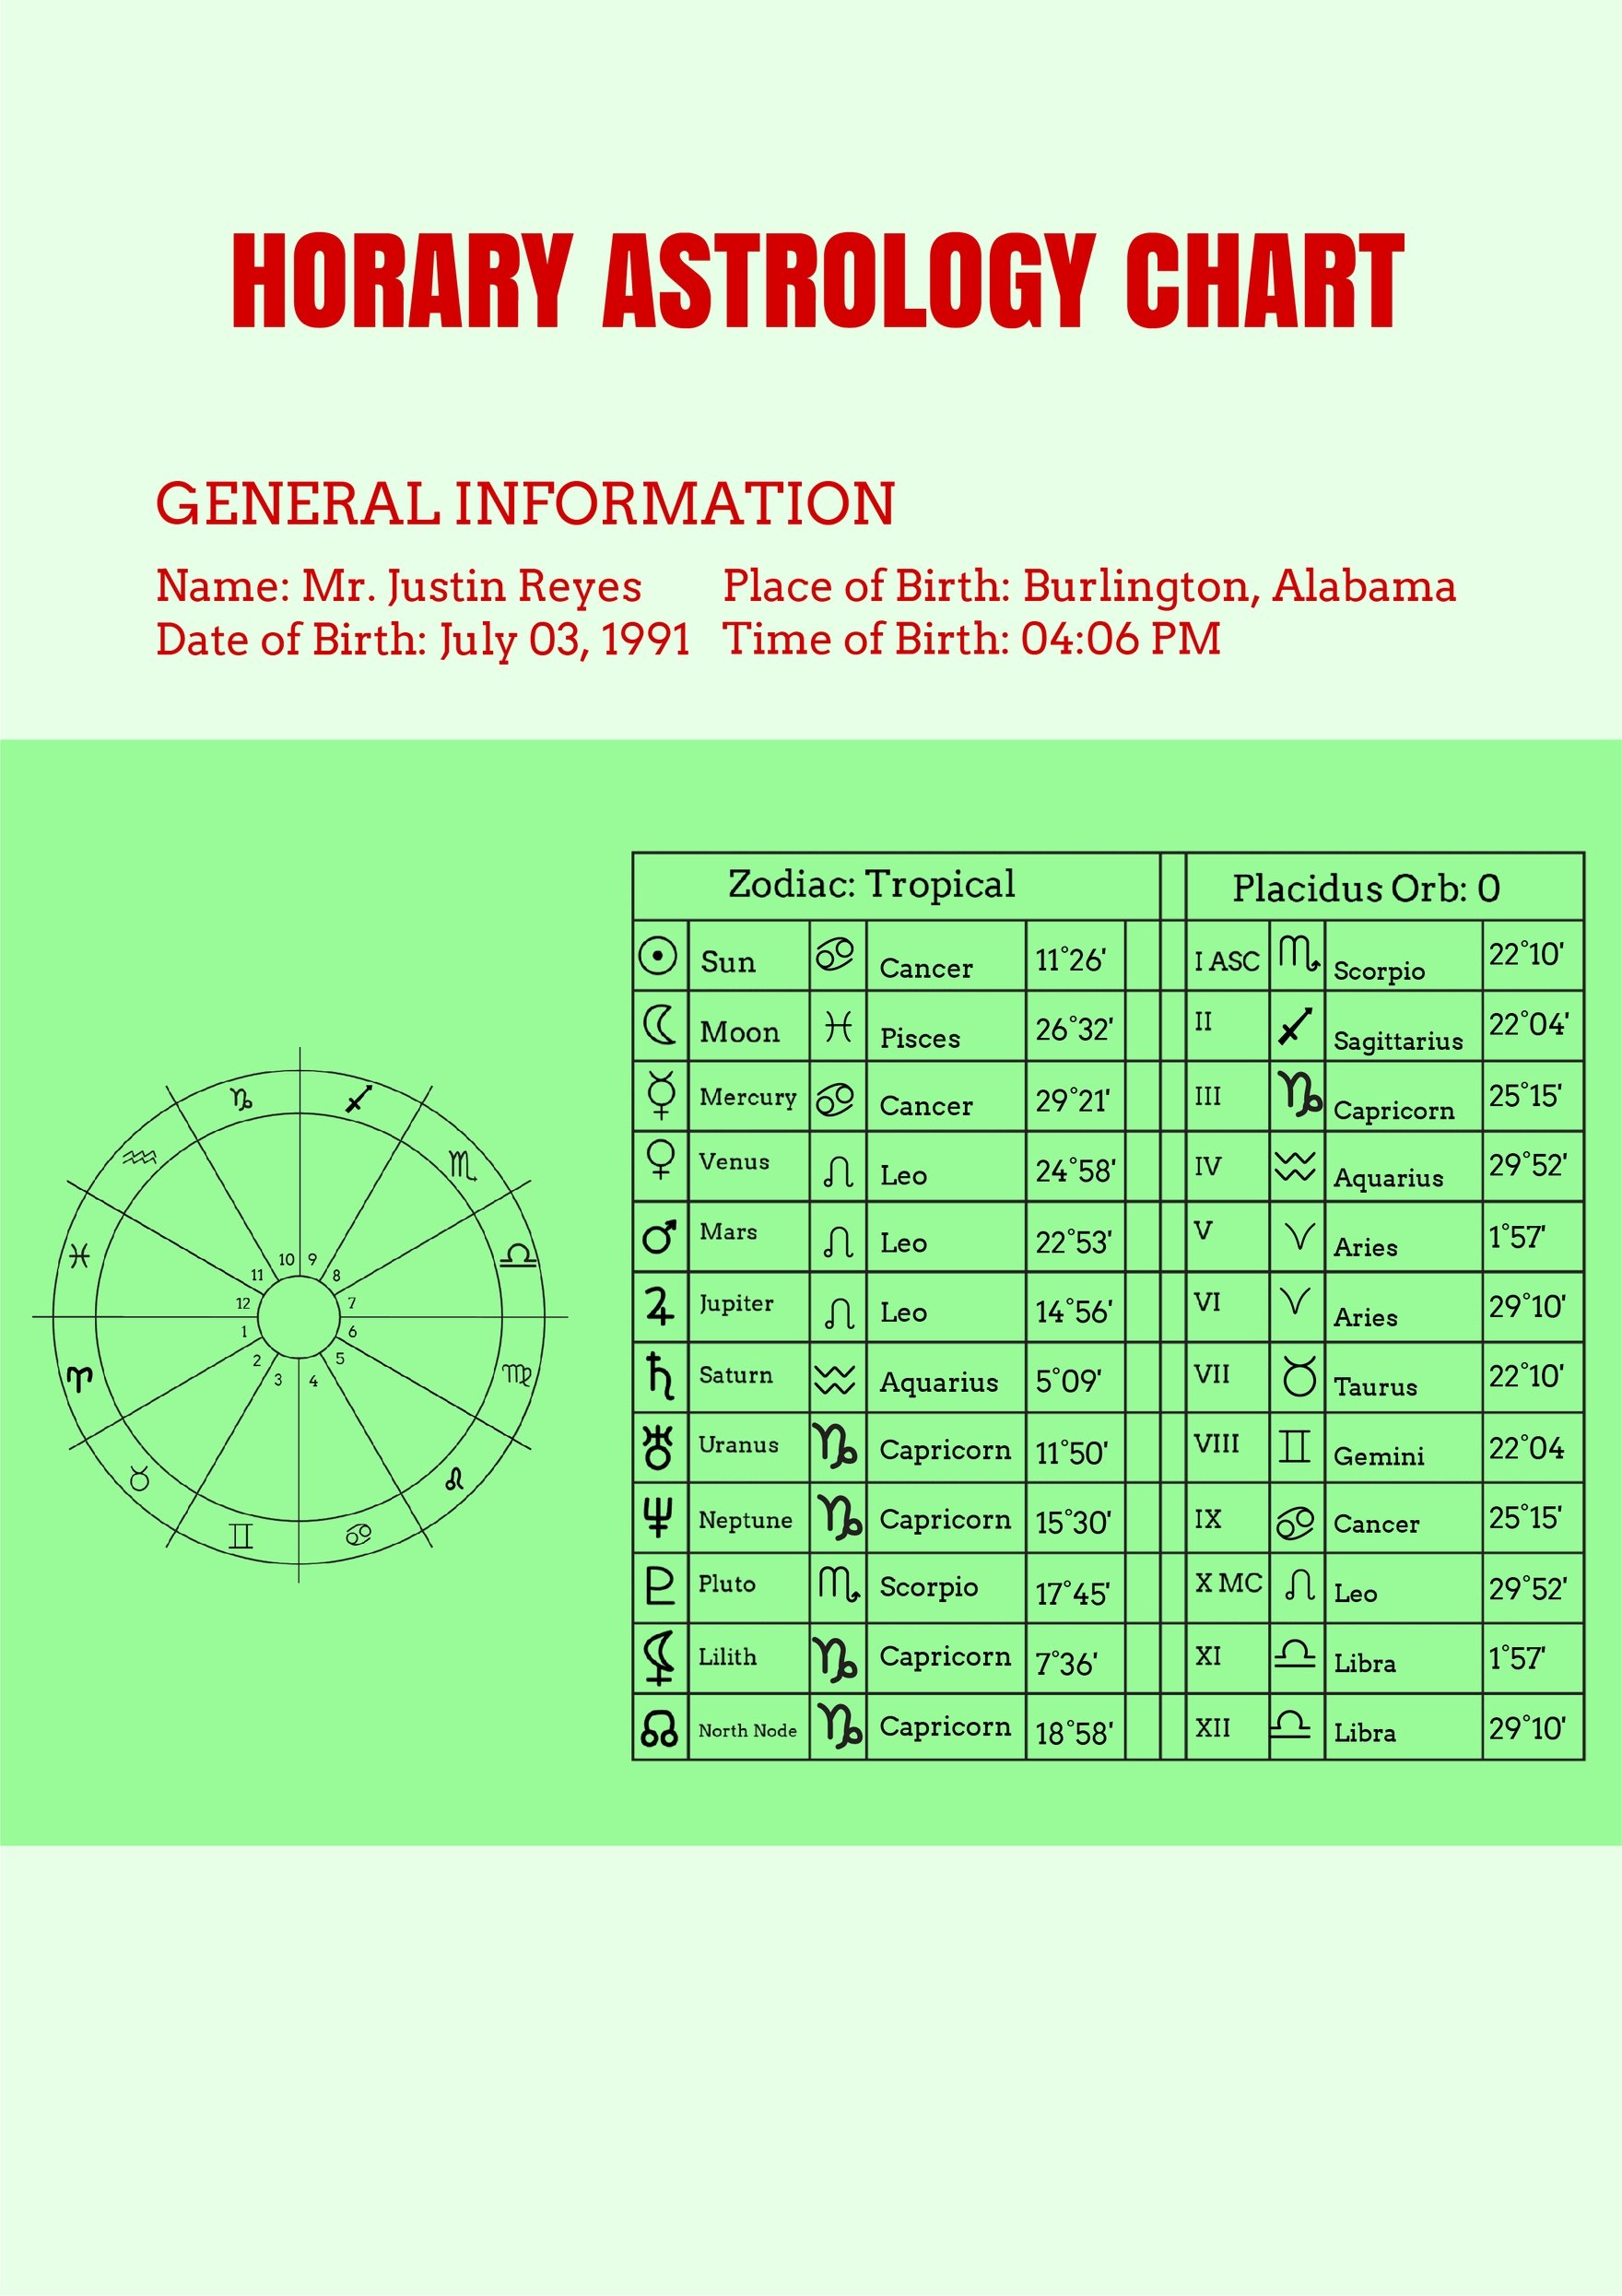 Horary Astrology Chart Template in PDF, Illustrator